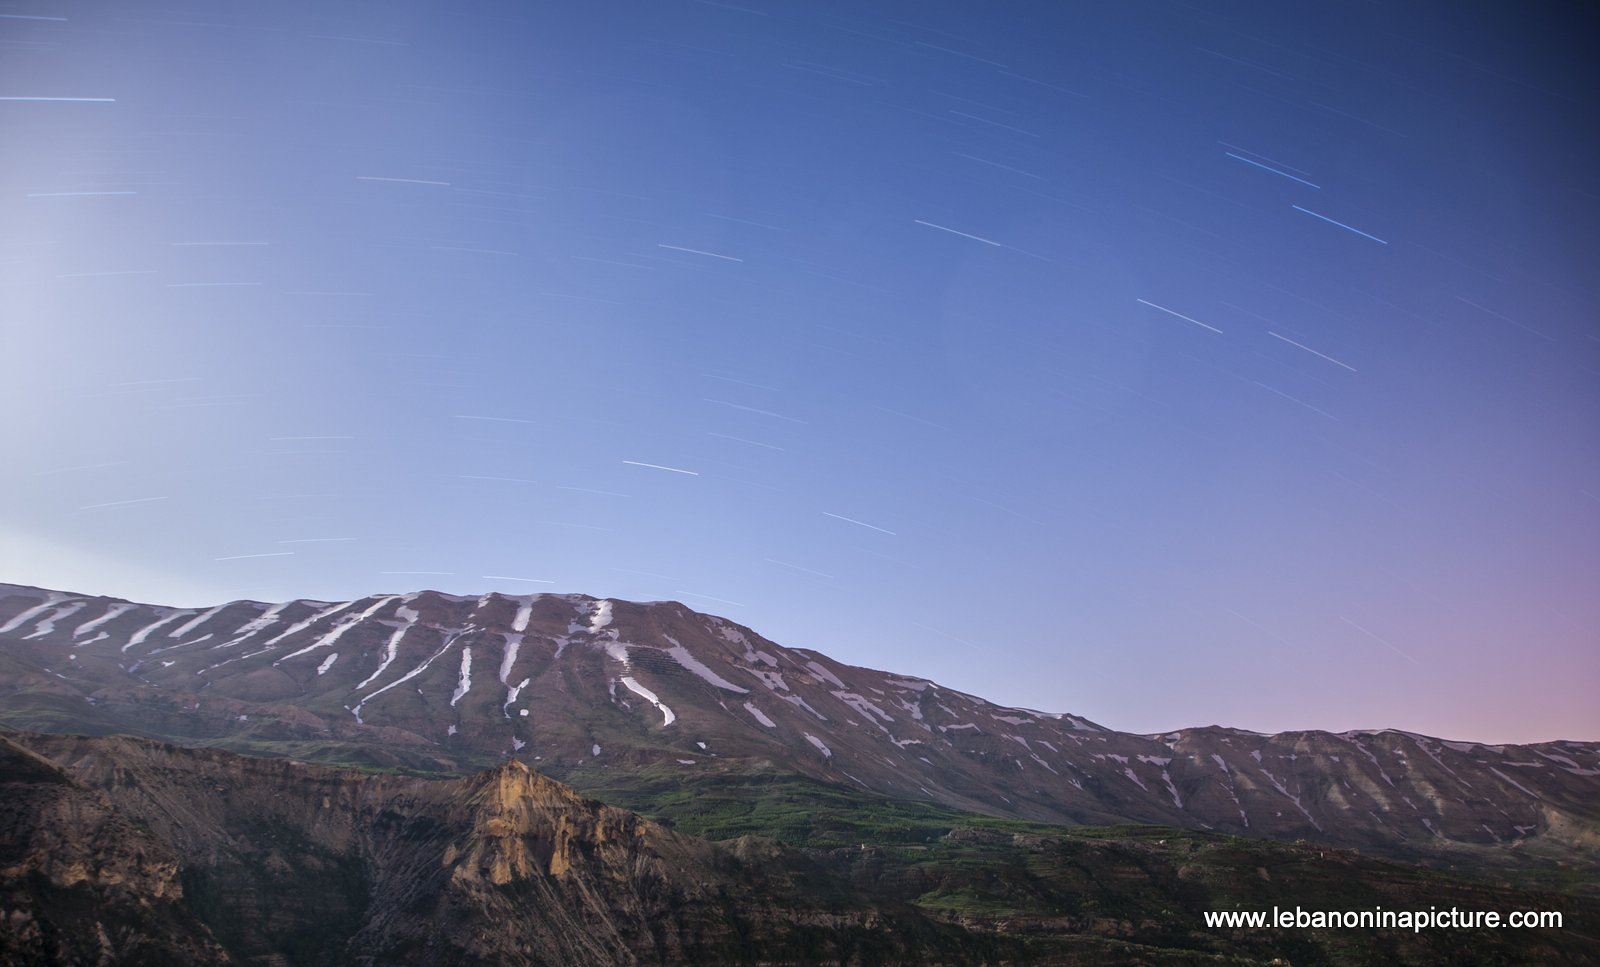 The Northern Lebanese Mountain With the Visible Star Trail